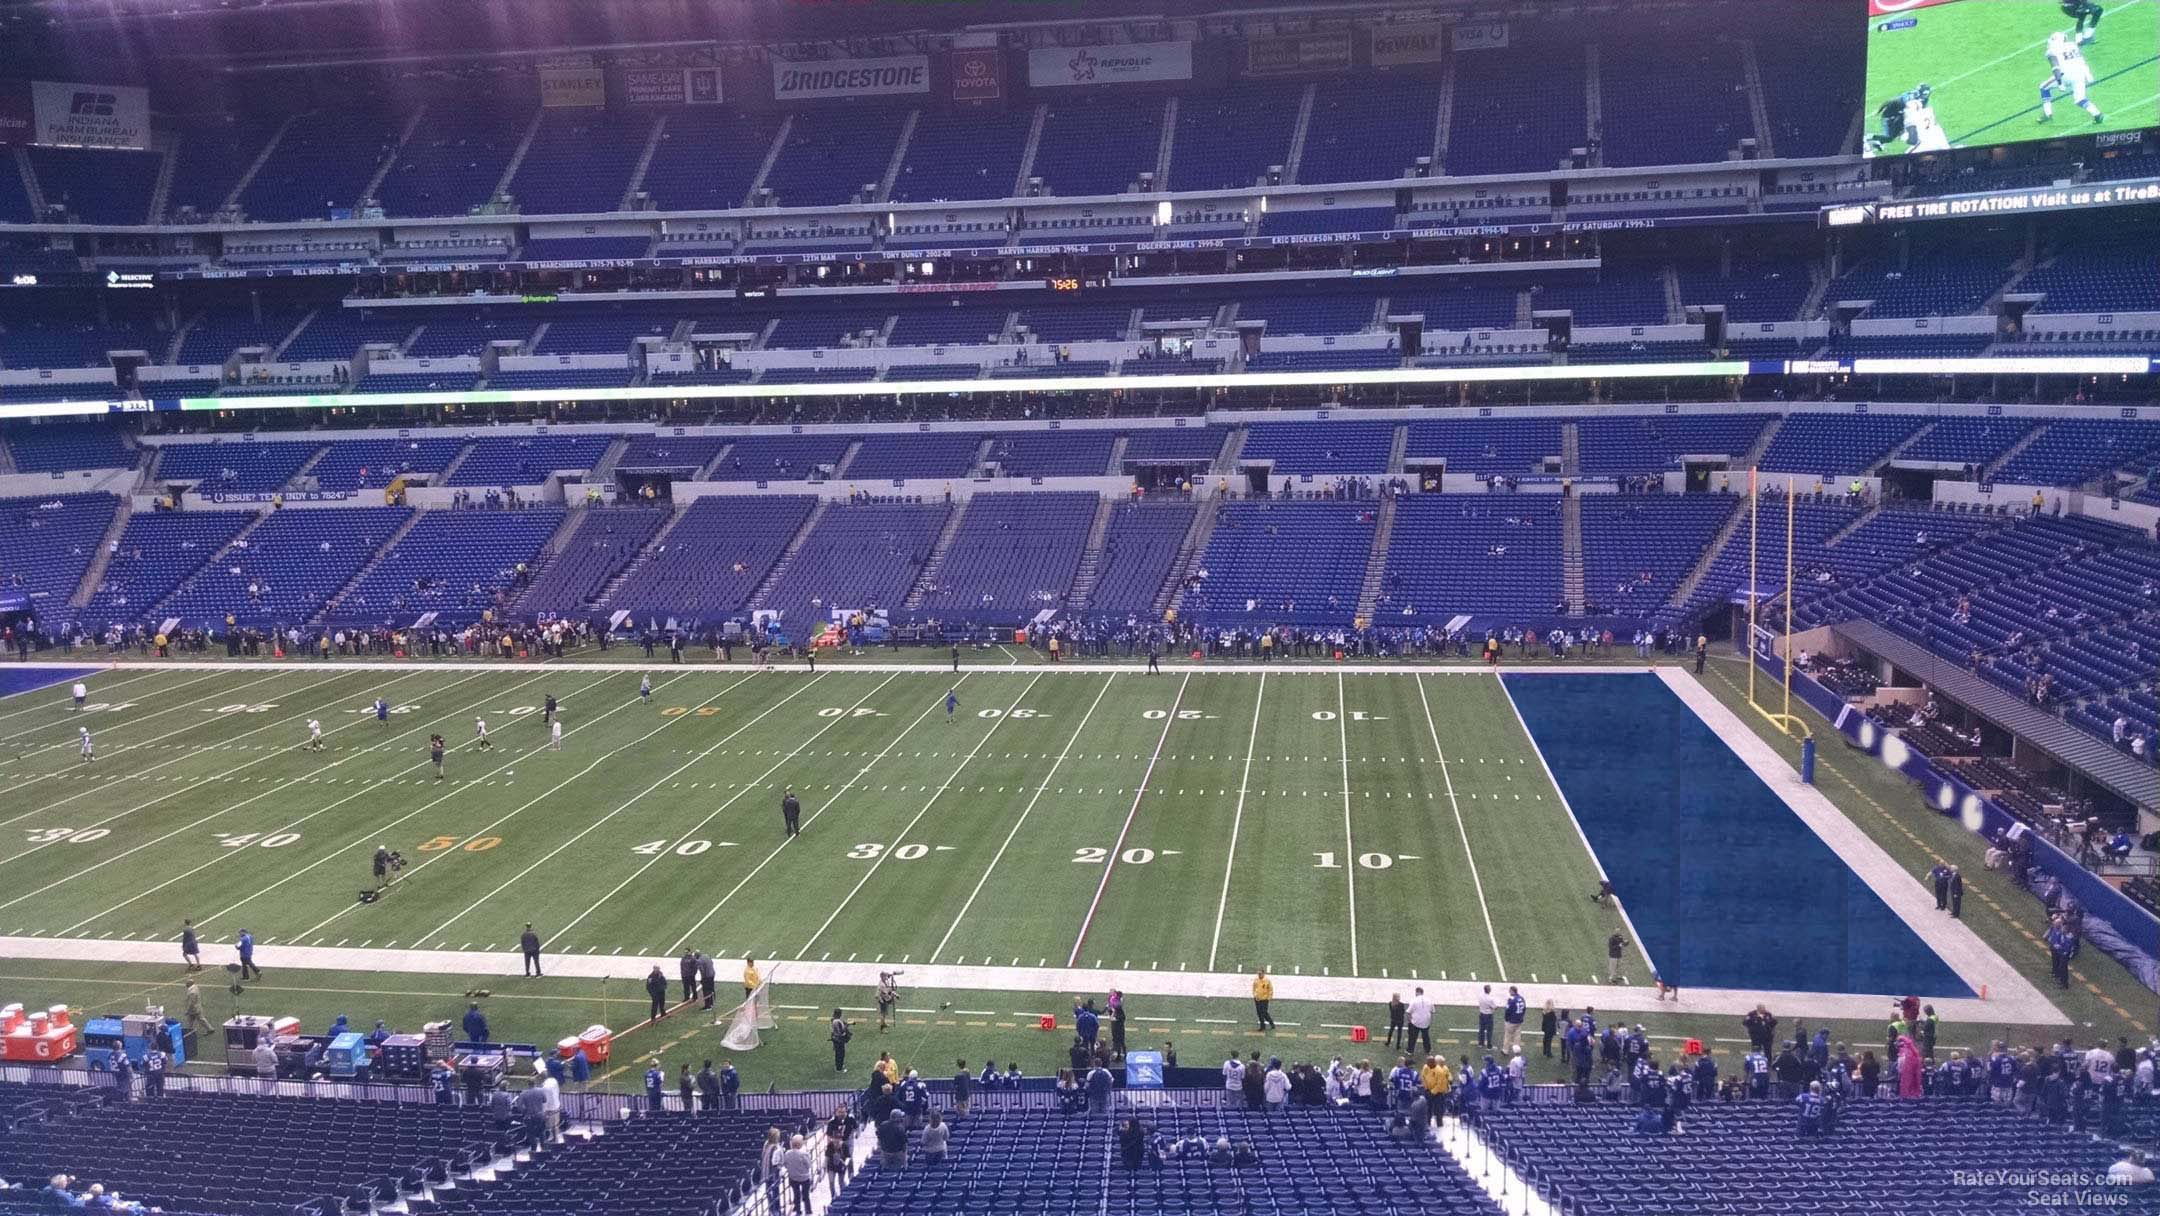 section 337, row 4 seat view  for football - lucas oil stadium